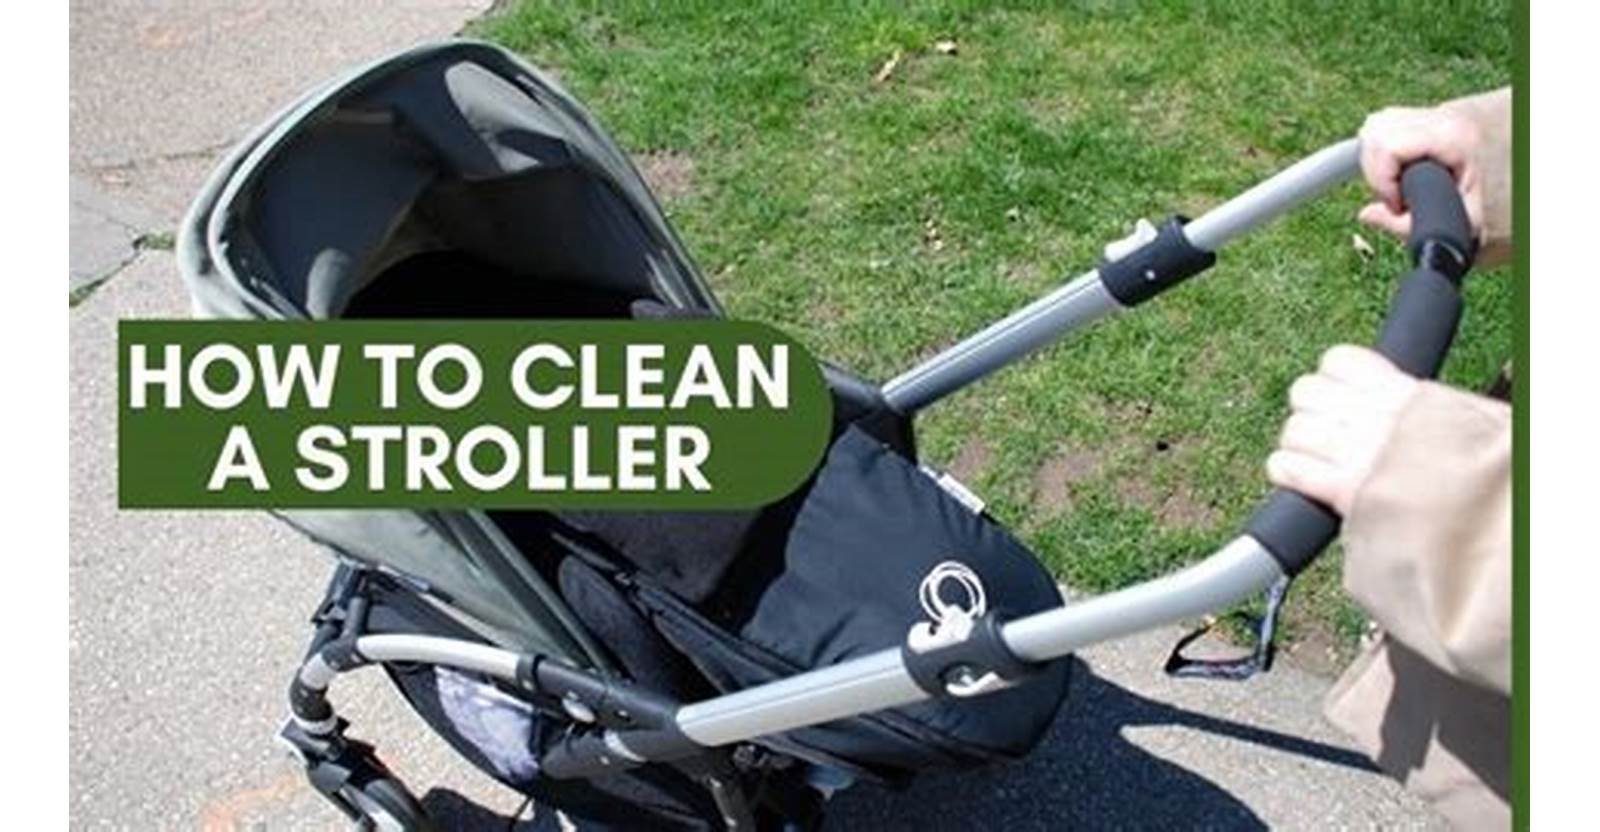 safety 1st stroller cleaning